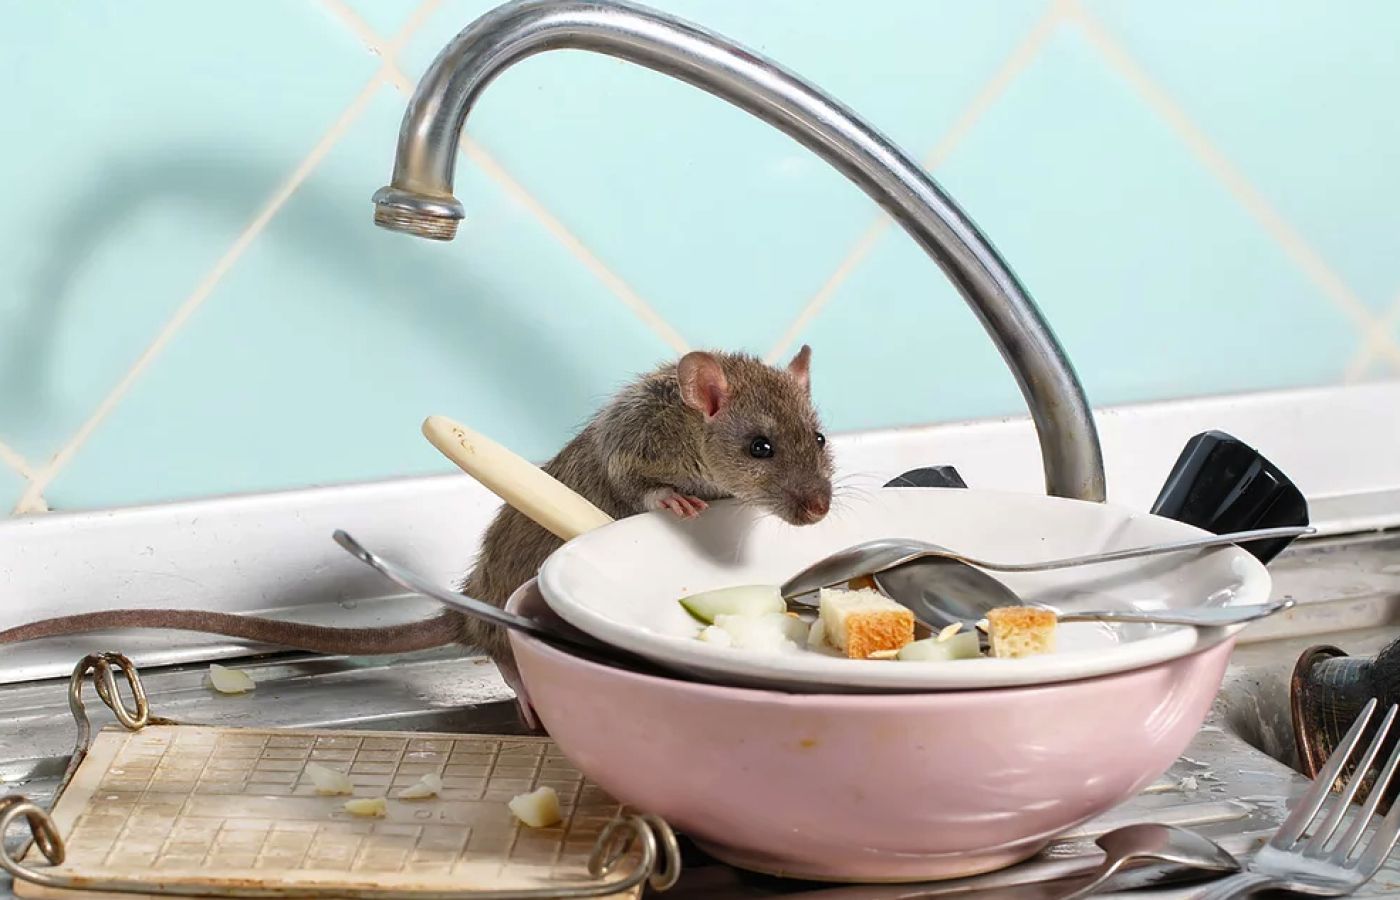 Rodents crawling over dishes in the sink